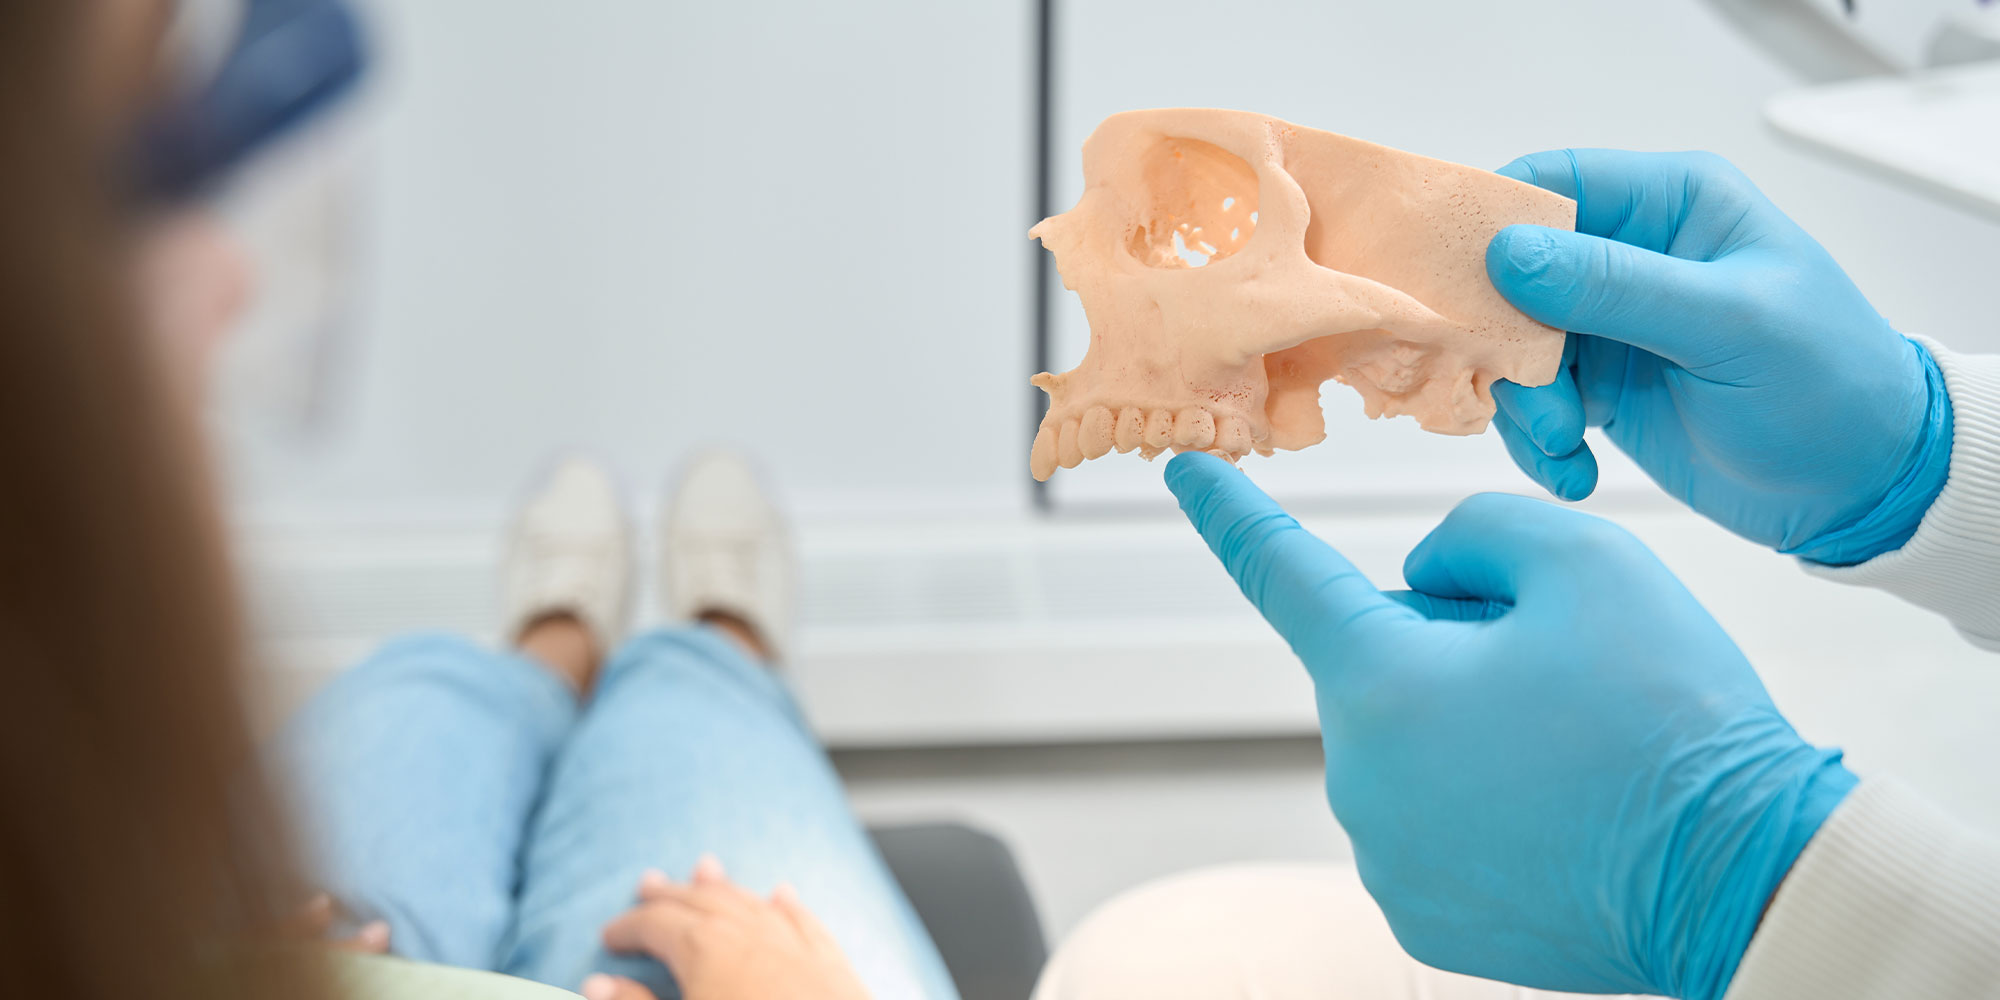 dentist pointing at 3d model of jawbone and teeth